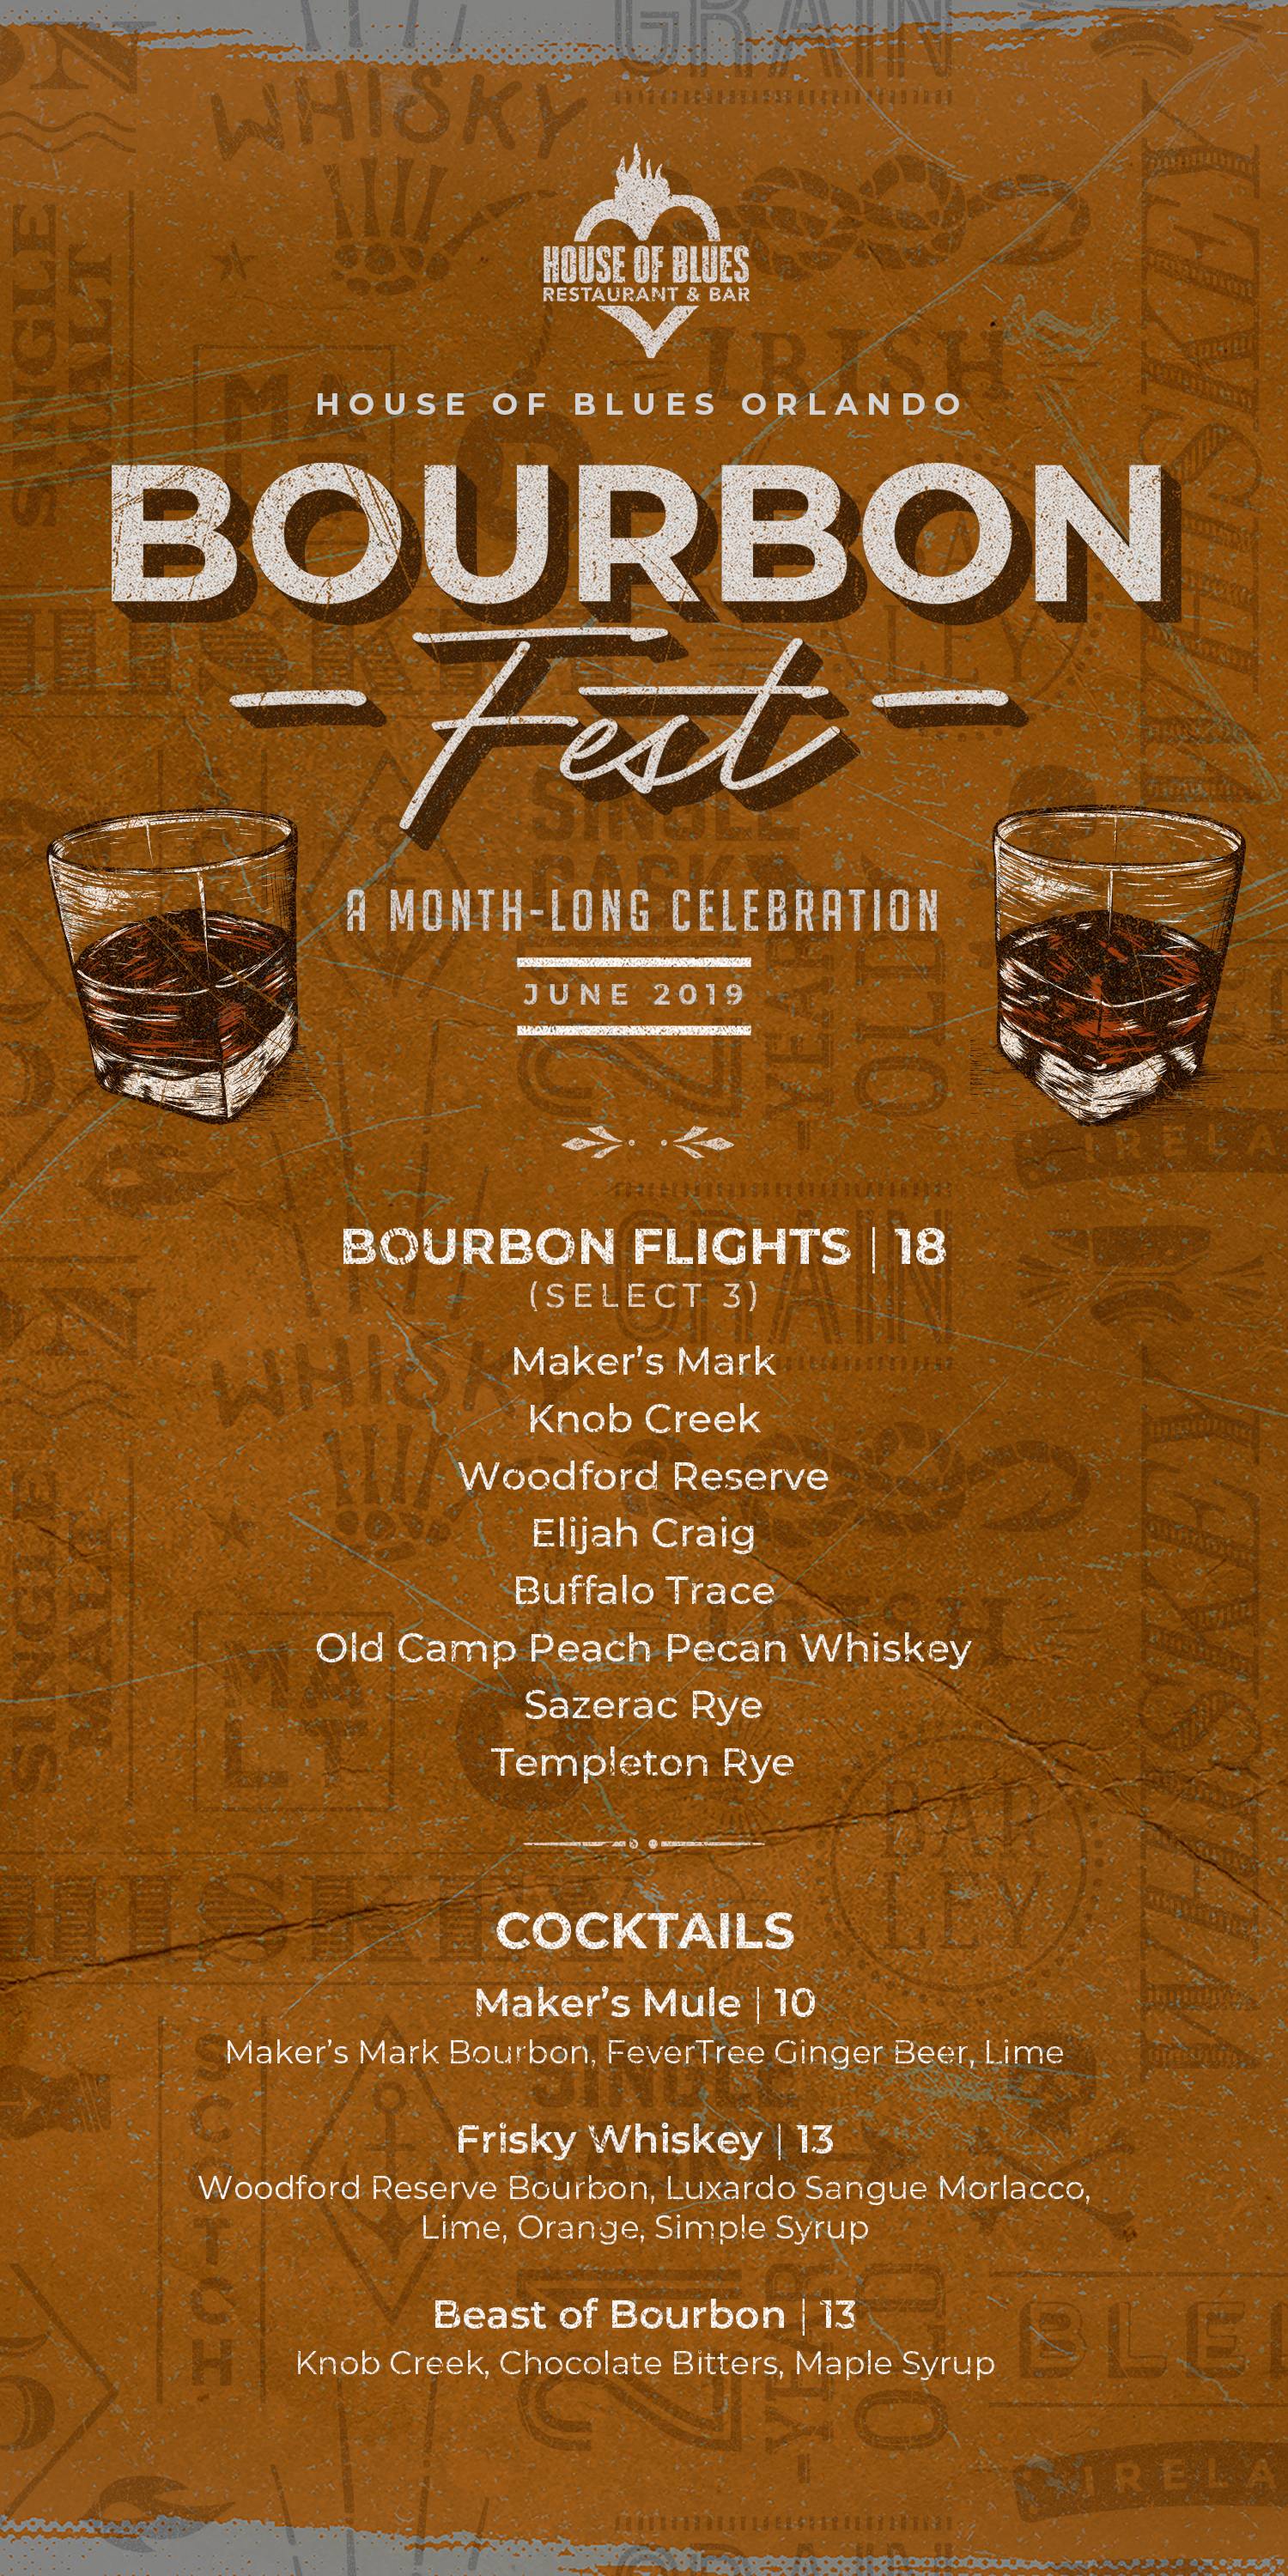 House of Blues celebrating all things bourbon throughout June at Disney Springs